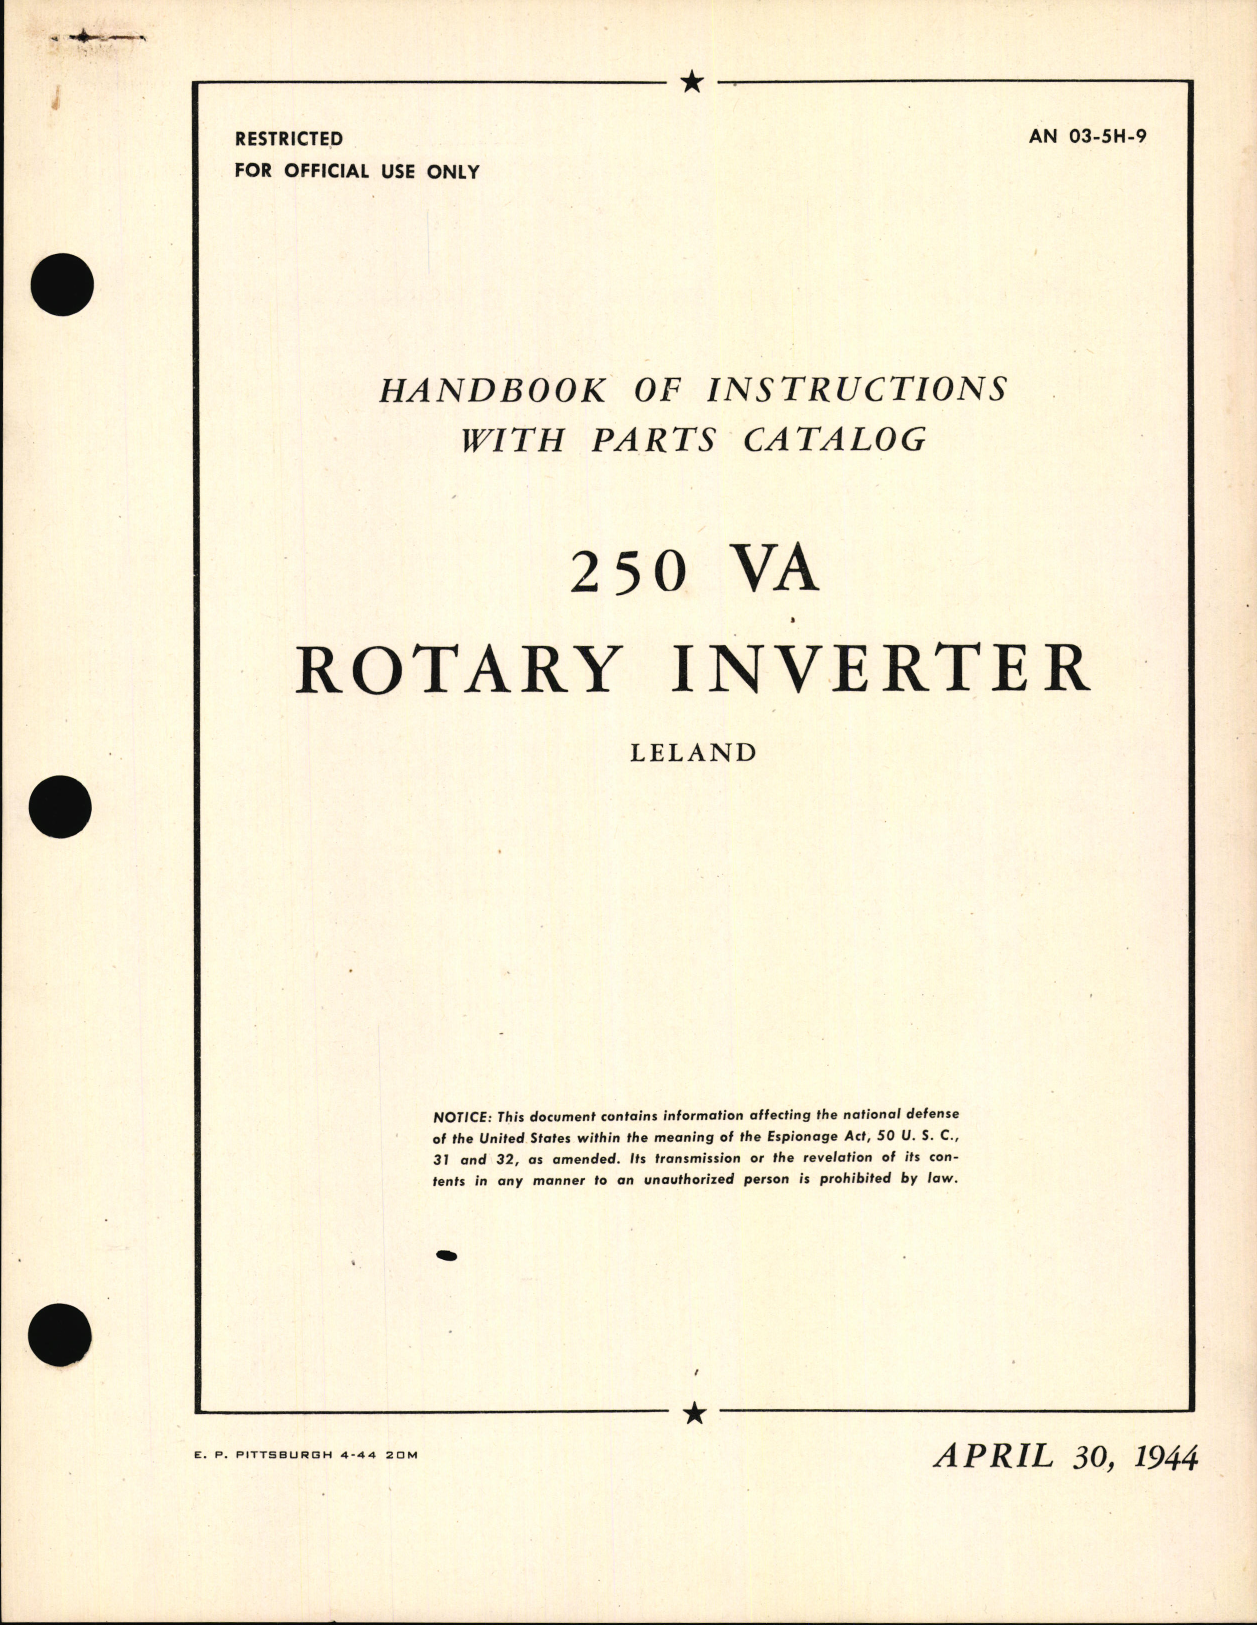 Sample page 1 from AirCorps Library document: Handbook of Instructions with Parts Catalog for 250 VA Rotary Inverter